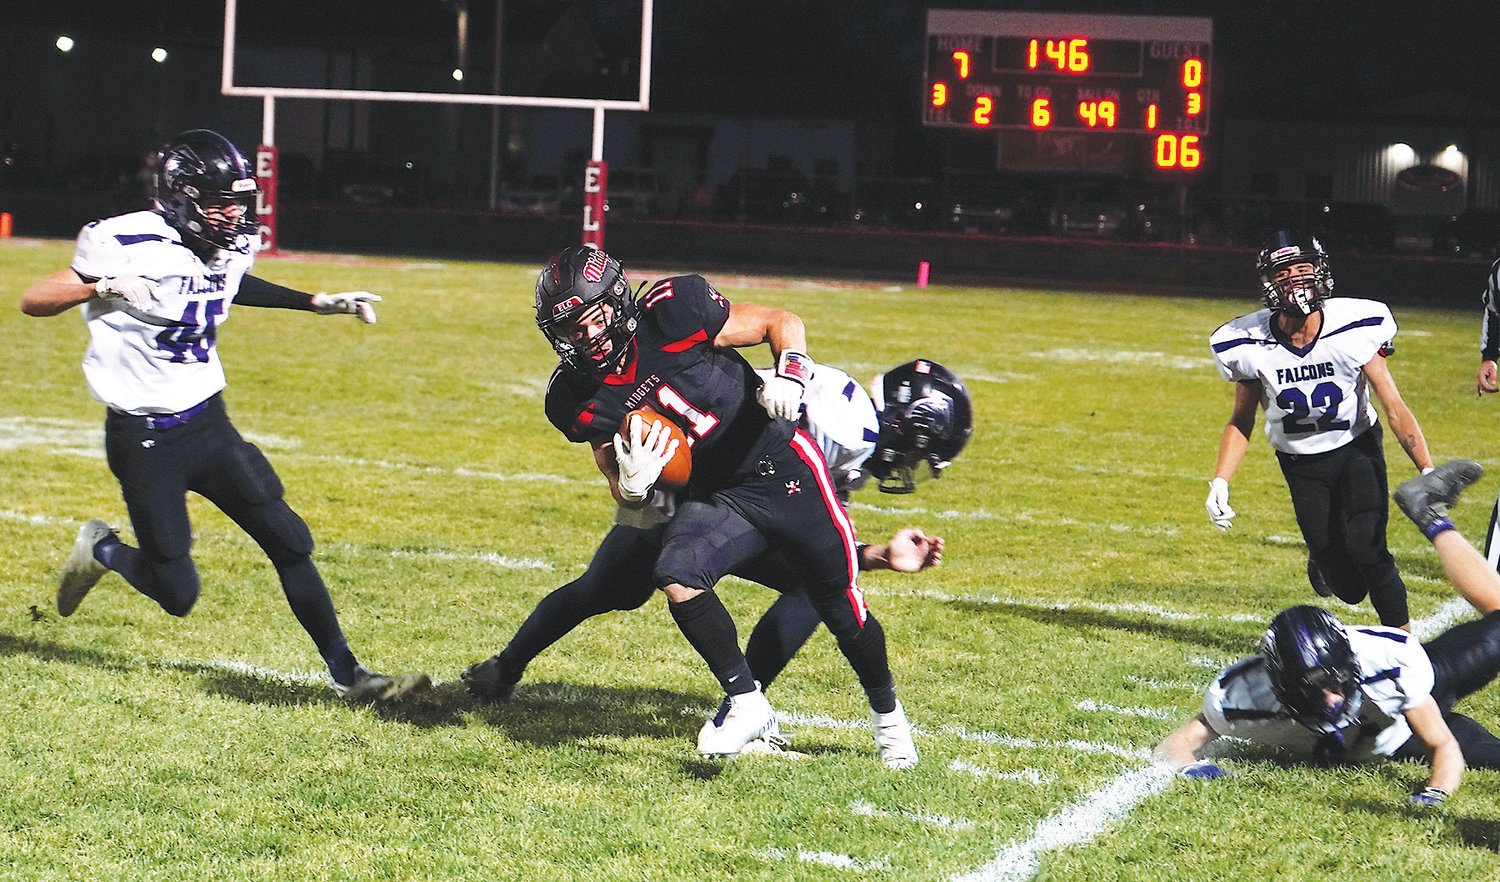 ELC’s Collin Cohrs left four OABCIG defenders in his wake on this 51-yard touchdown reception in the first quarter of last Friday’s game at Hoyt Luithly Field in Estherville.
Photo by David Swartz